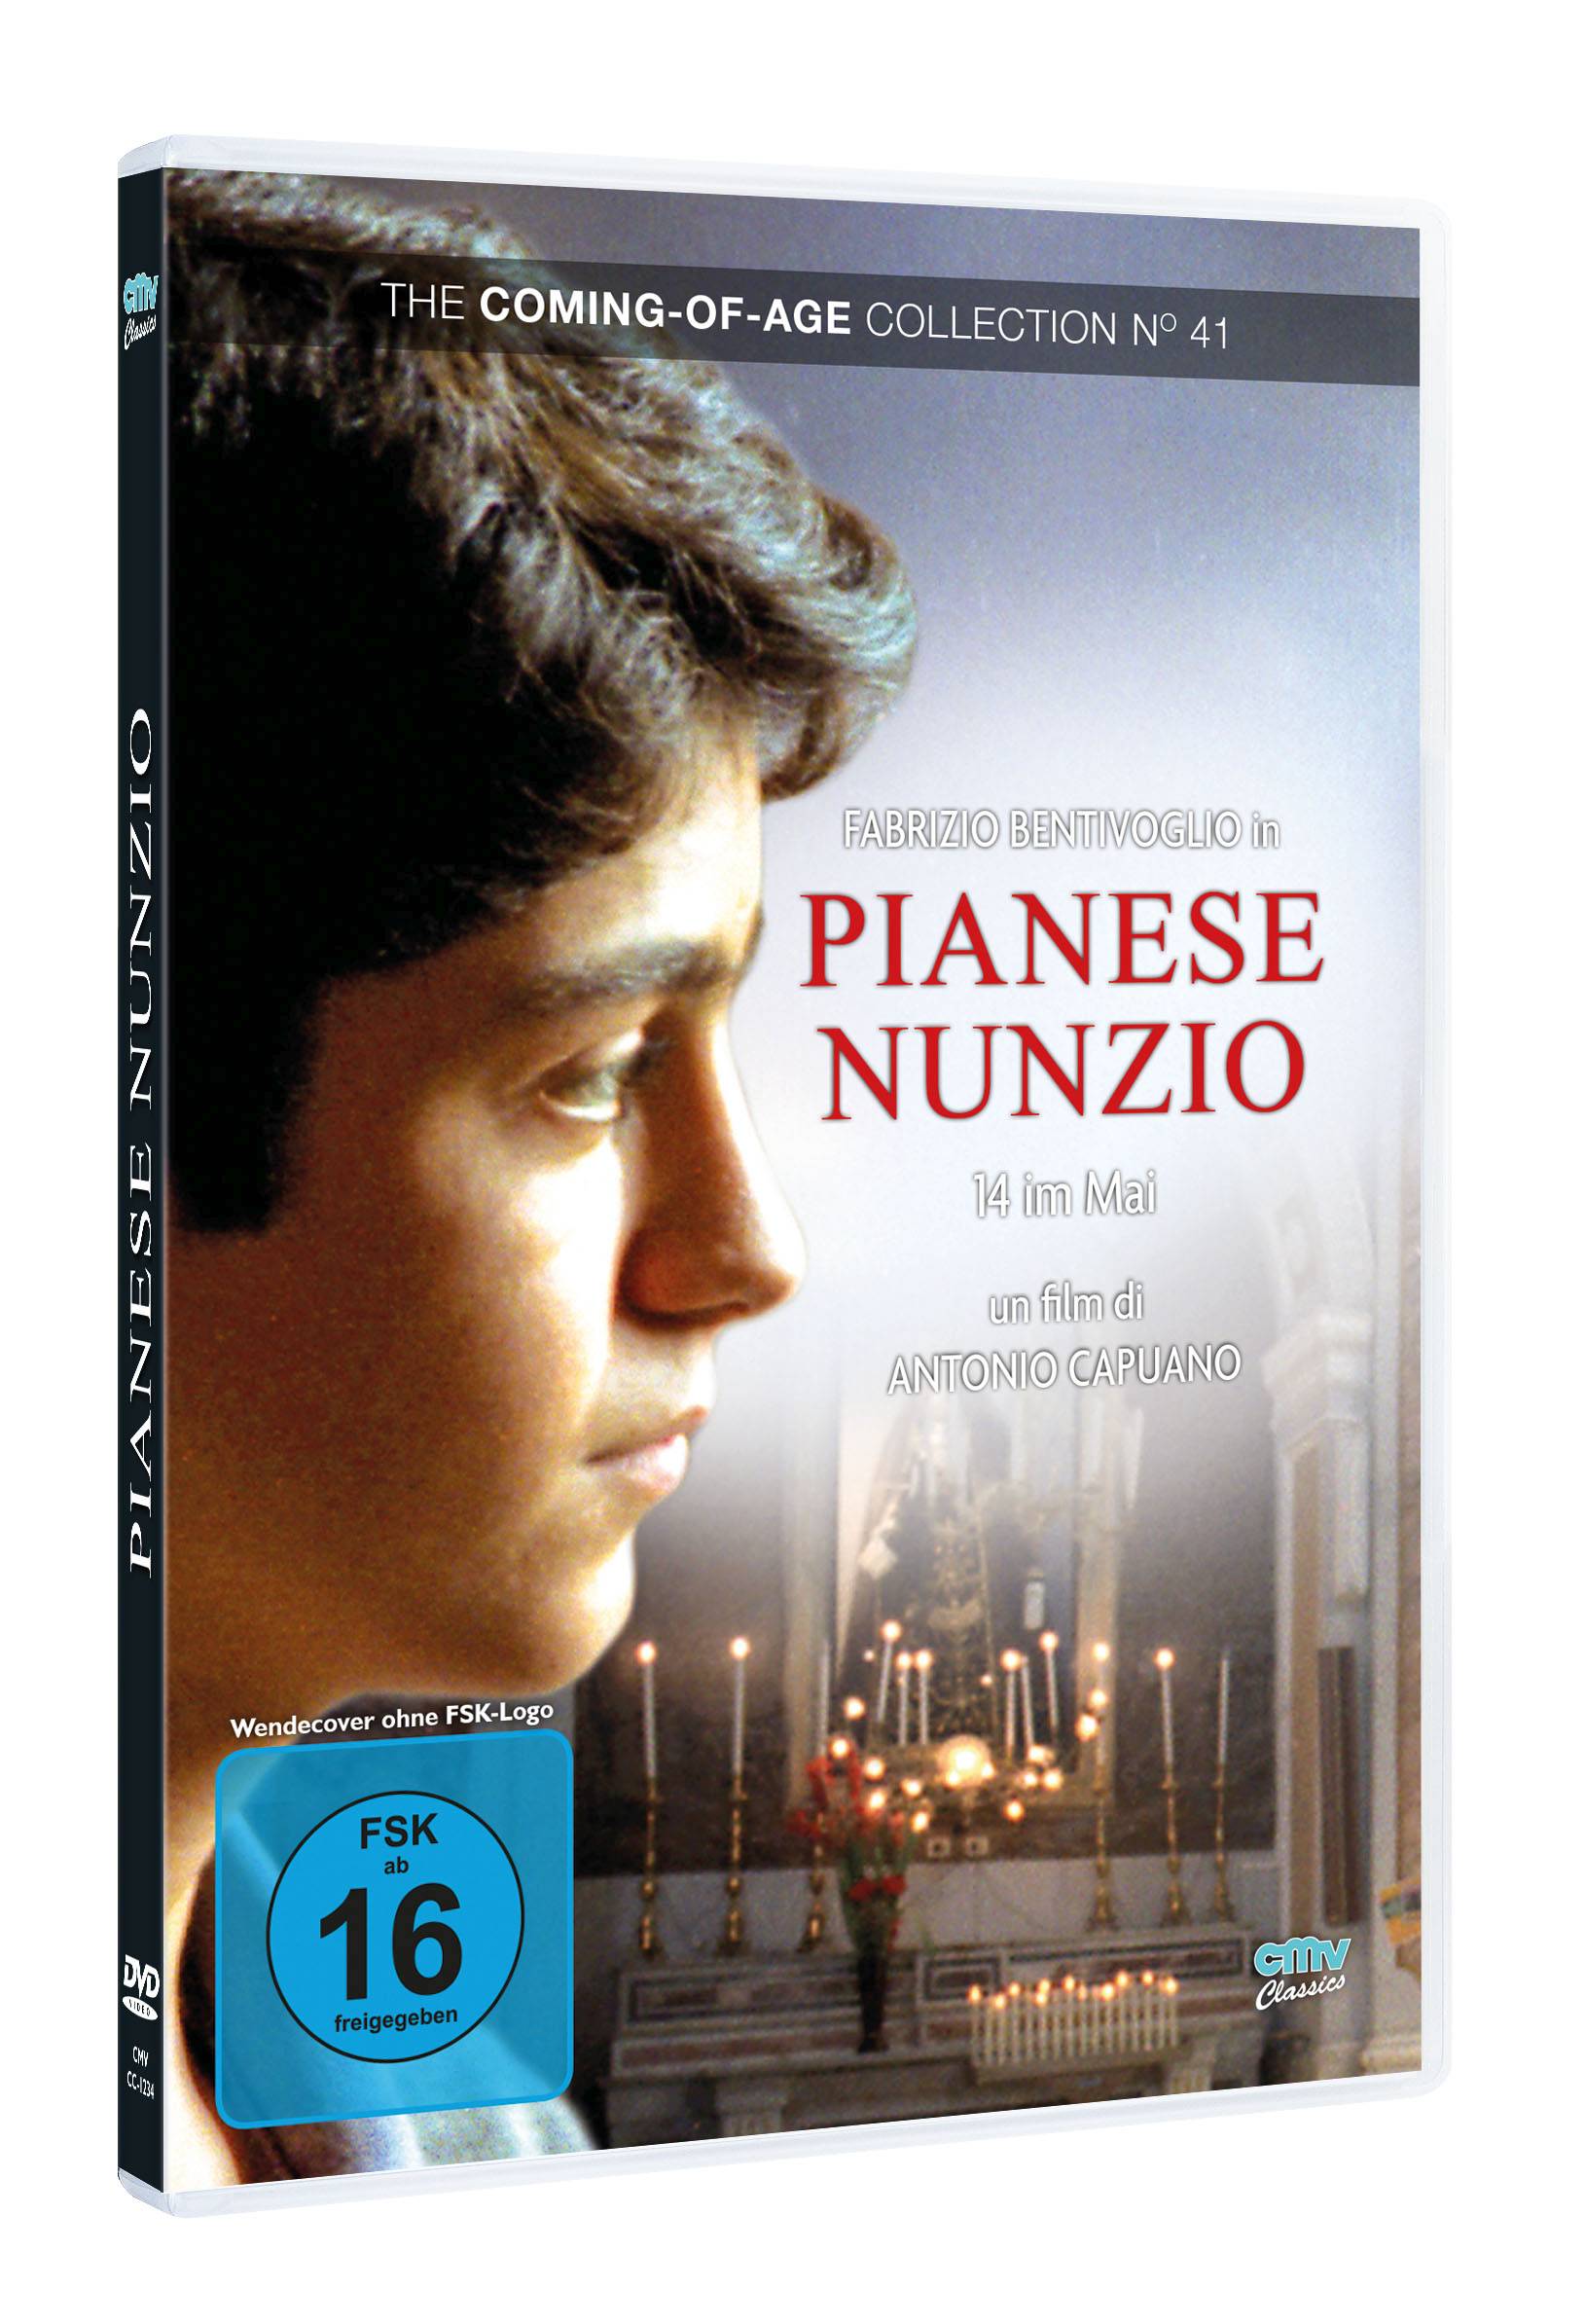 Pianese Nunzio - 14 im Mai (The Coming-of-Age Collection No. 41)